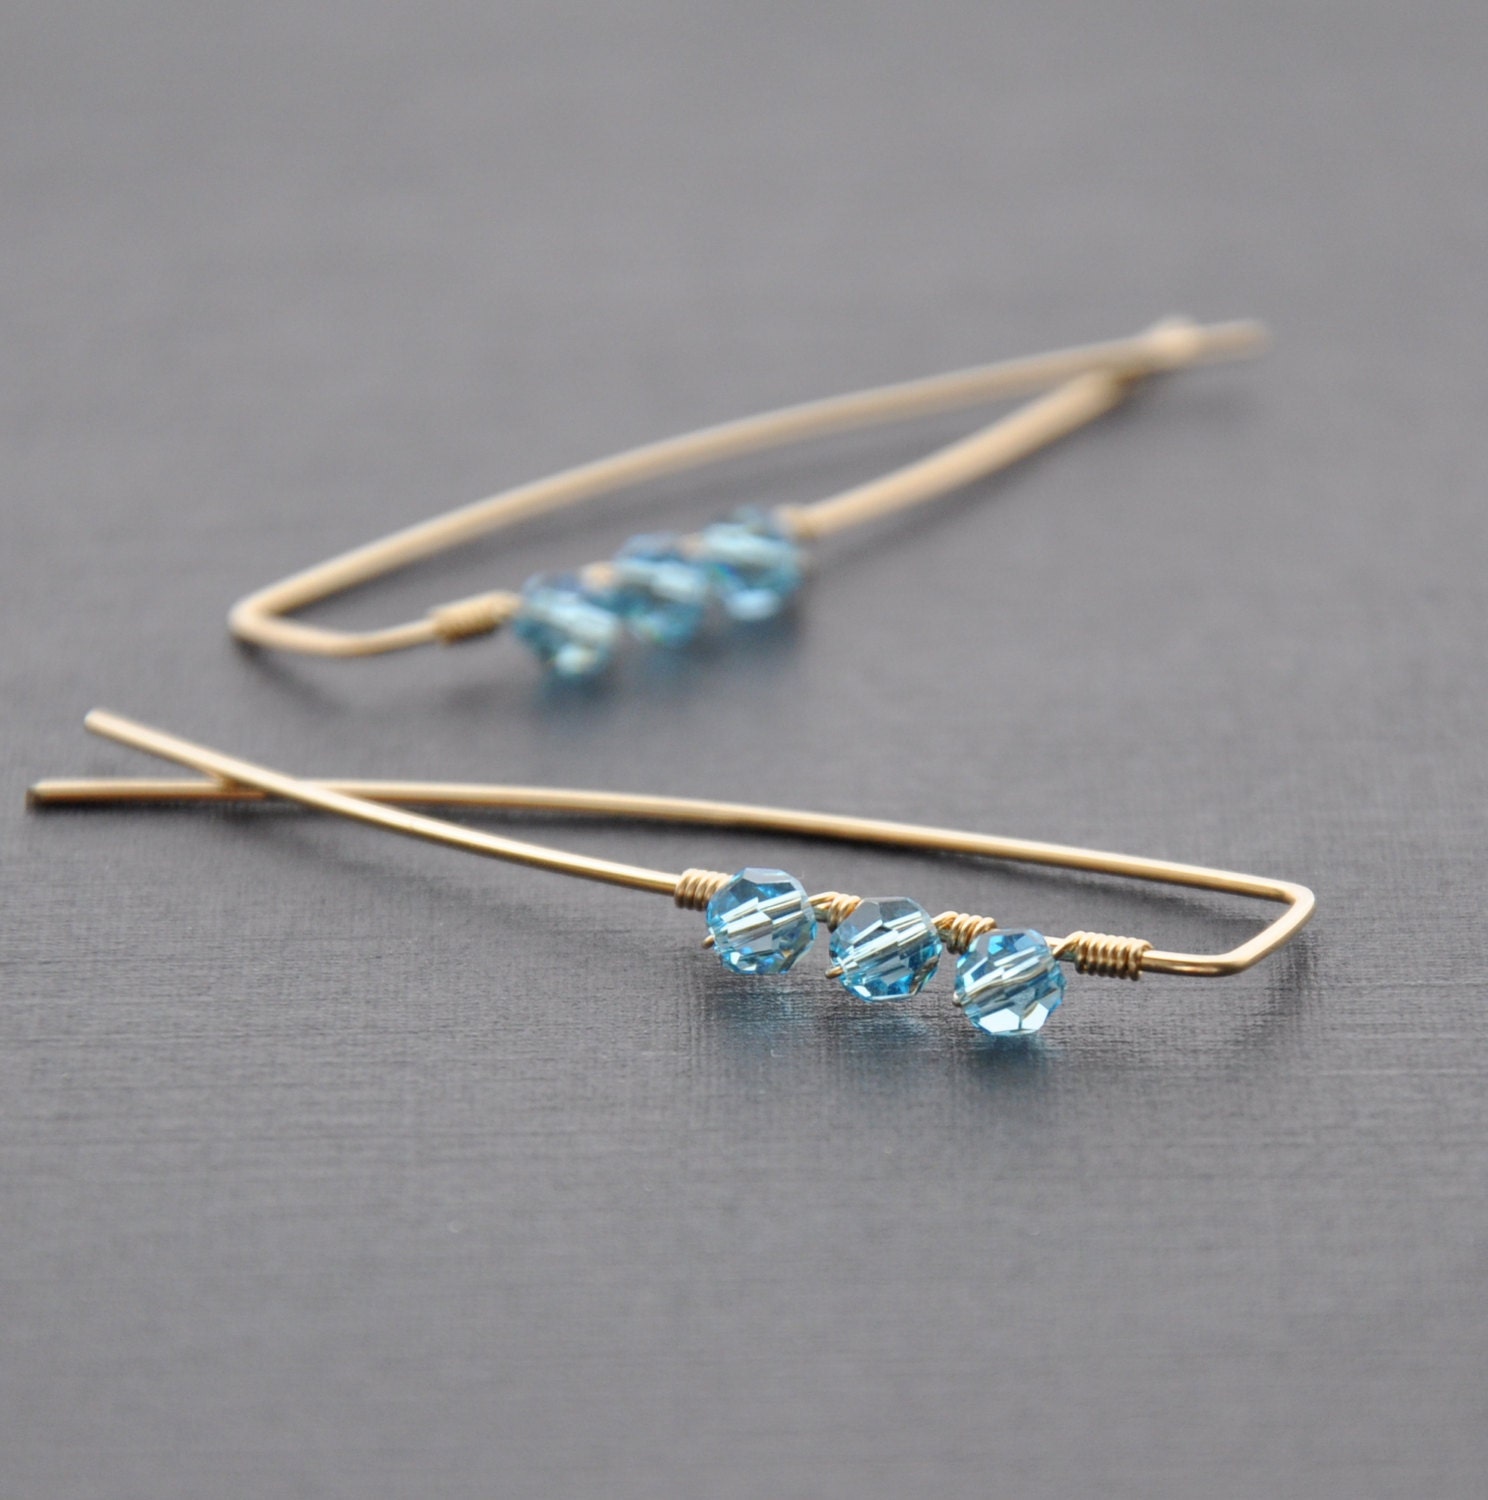 March Birthstone Earrings in Aquamarine Blue Crystal. 2" Gold Threader.  Birthday Gift Idea.  Most Birthstones Available. - GueGueCreations